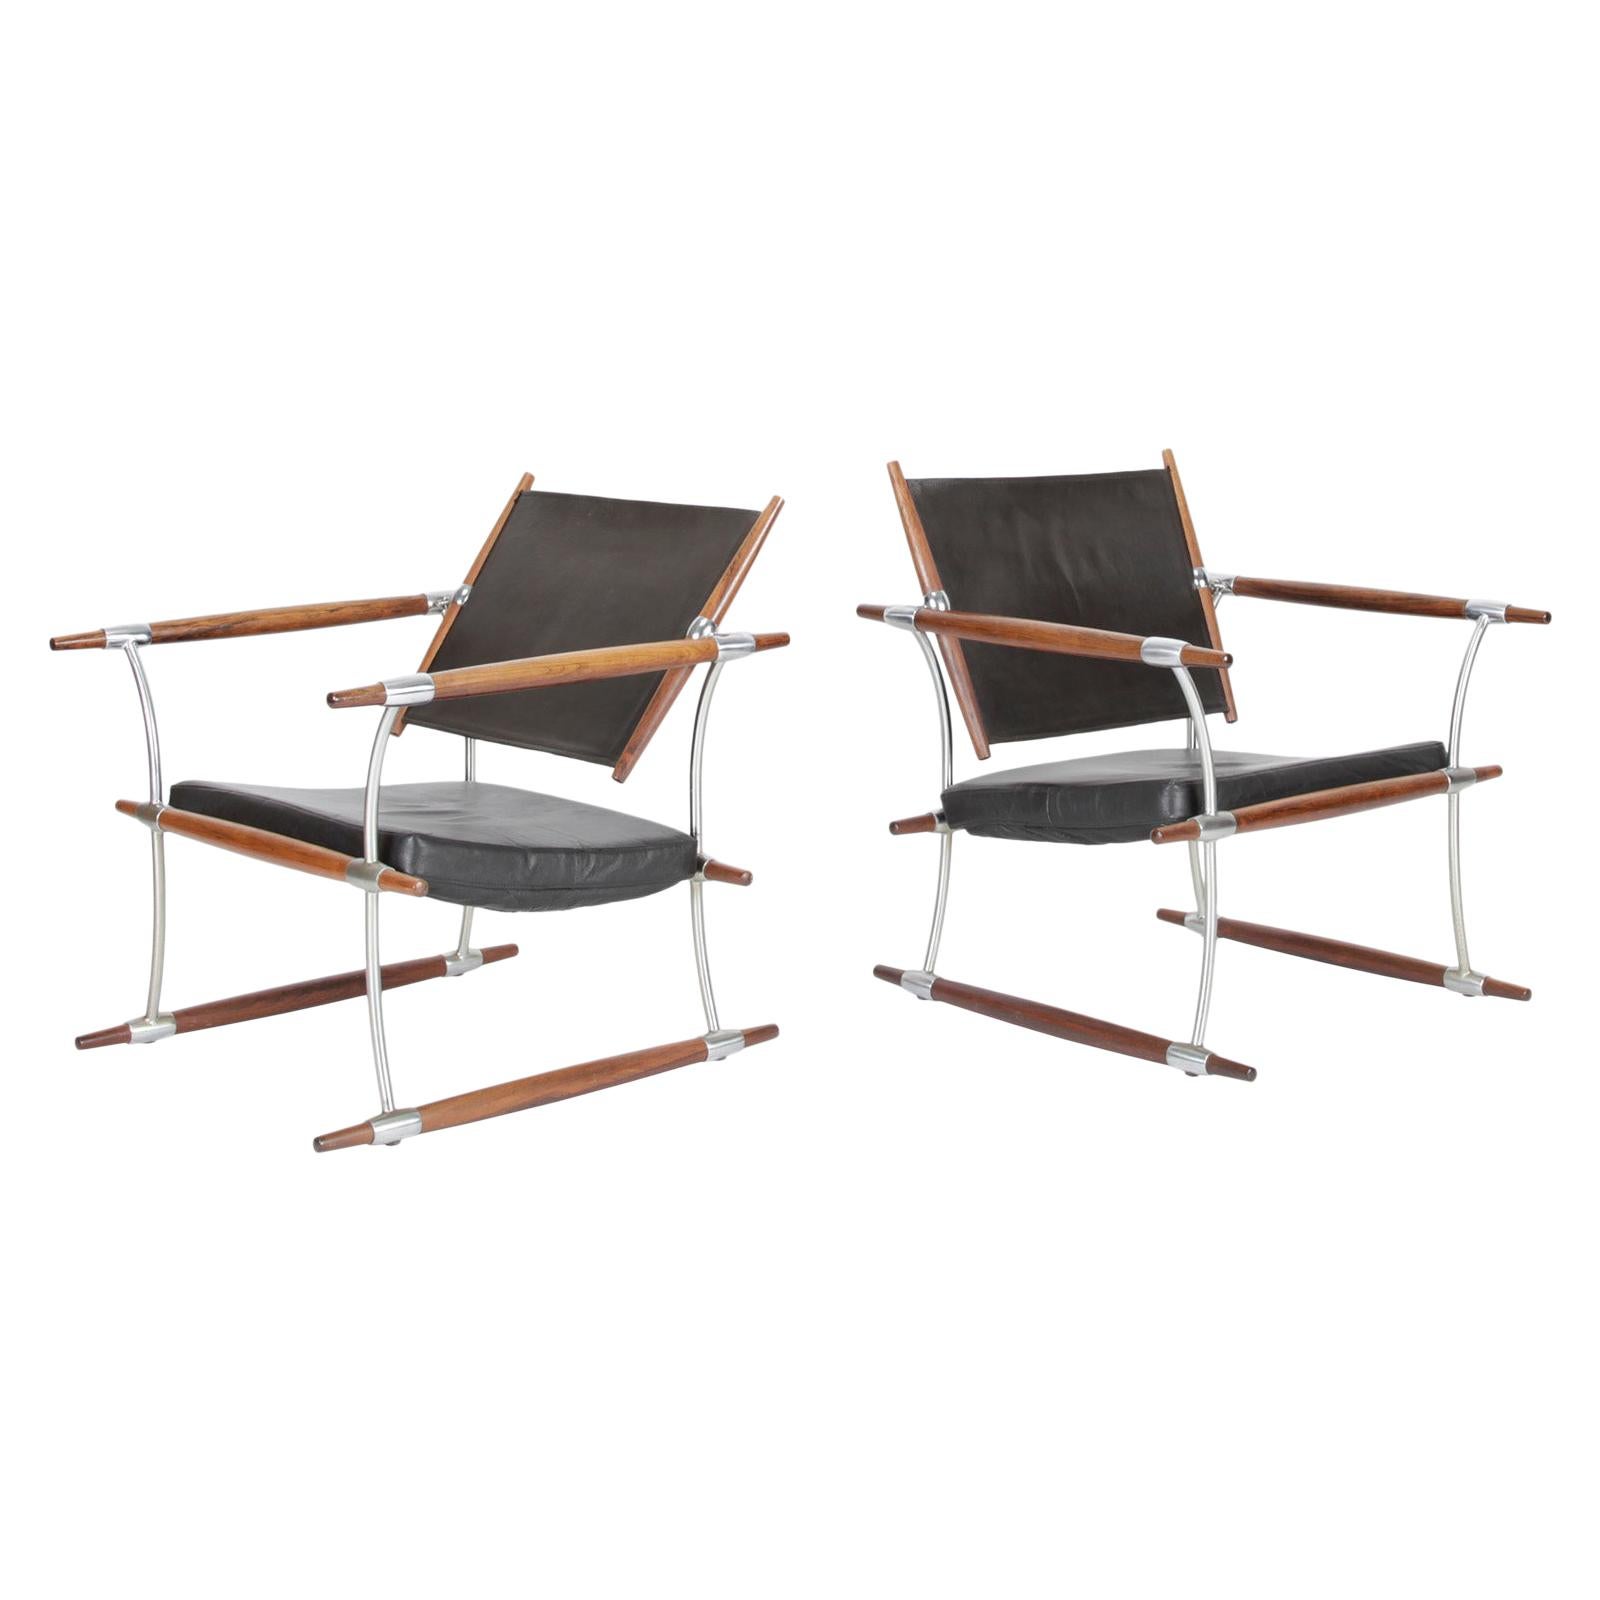 Pair of Safari Chairs in Rosewood by Jens Quistgaard